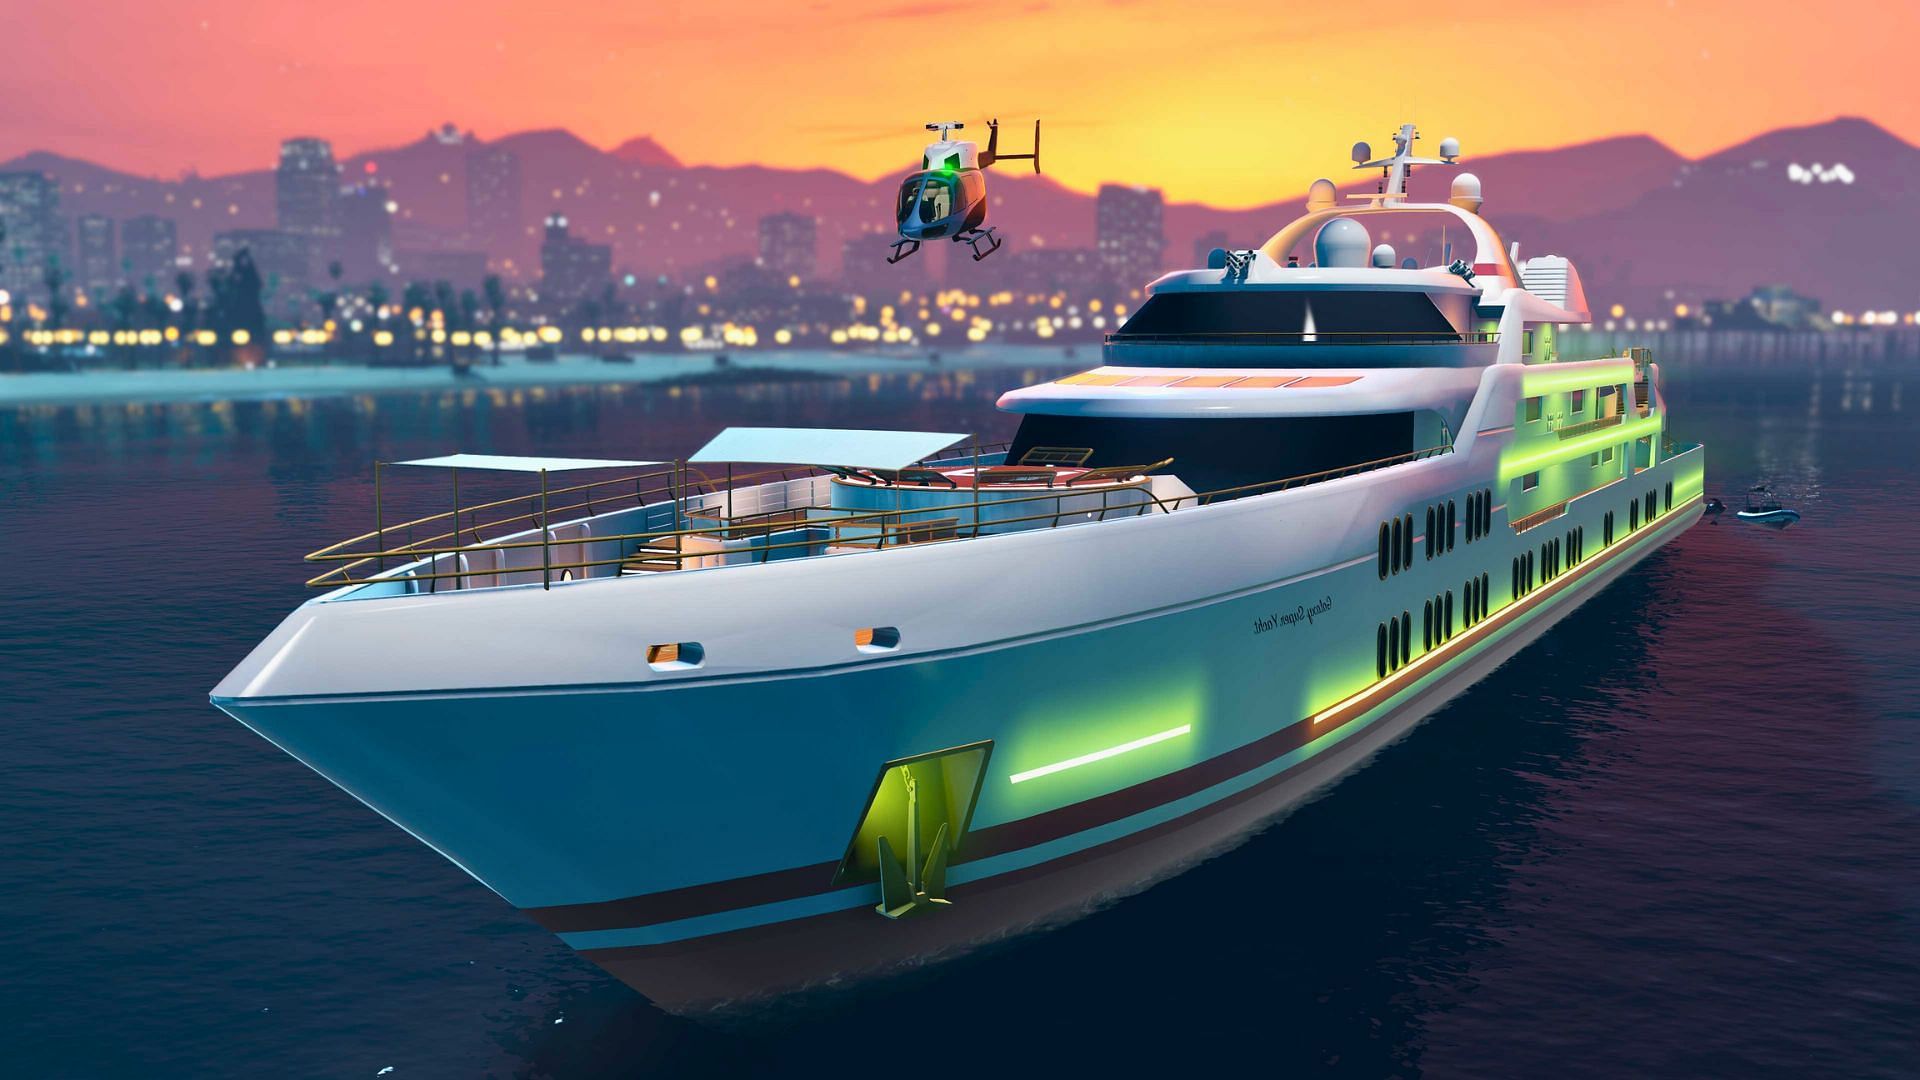 How to play A Superyacht Life missions in GTA Online this week